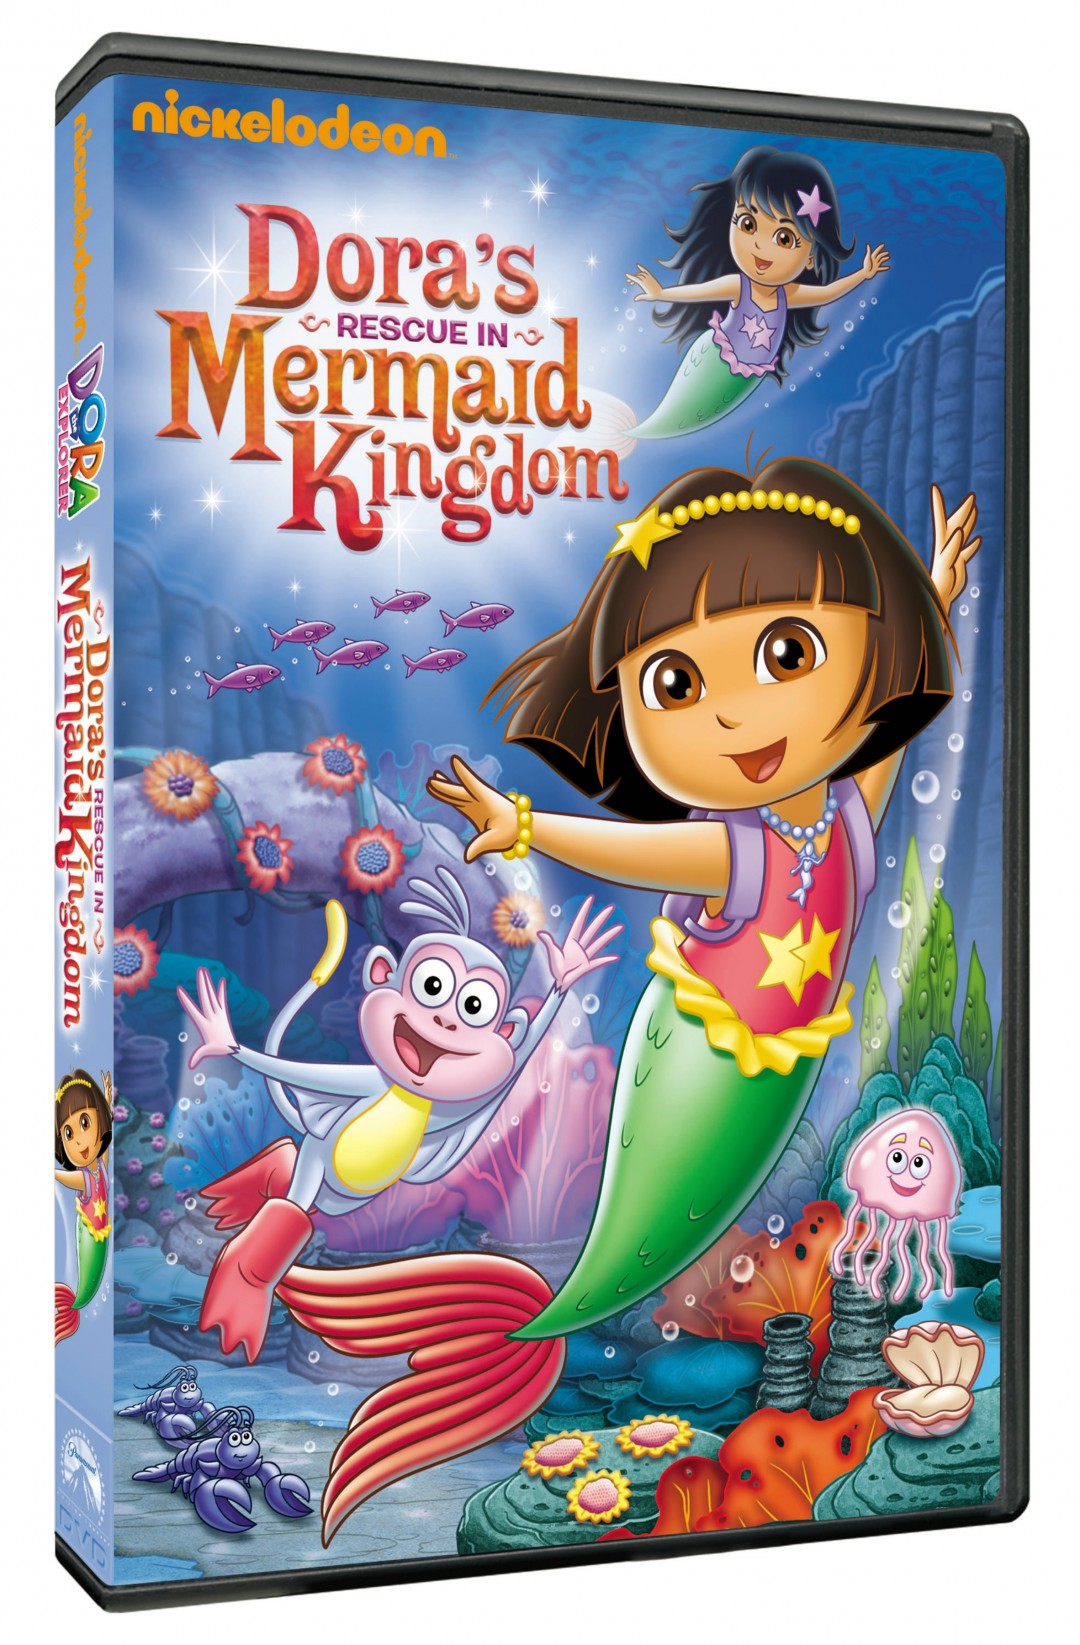 Dora’s Rescue in Mermaid Kingdom and iCarly: The Complete 4th Season DVD .....